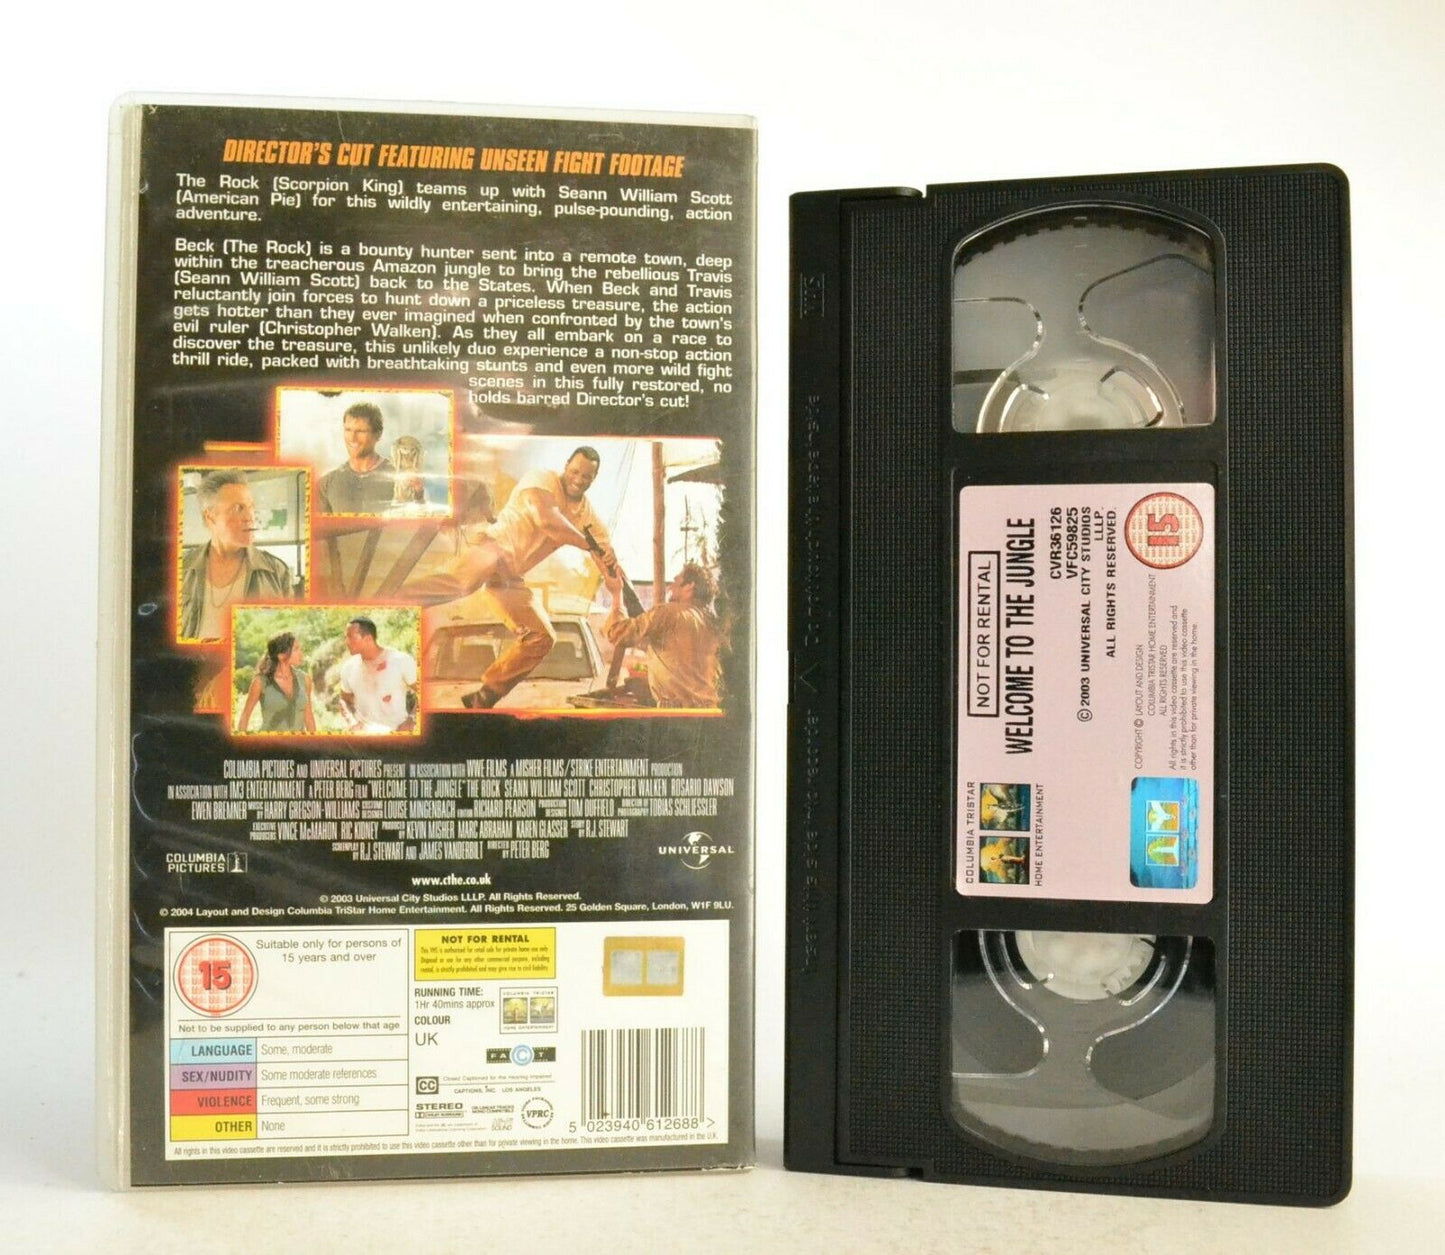 Welcome To The Jungle: Action/Adventure (2003) - Director's Cut - The Rock - VHS-